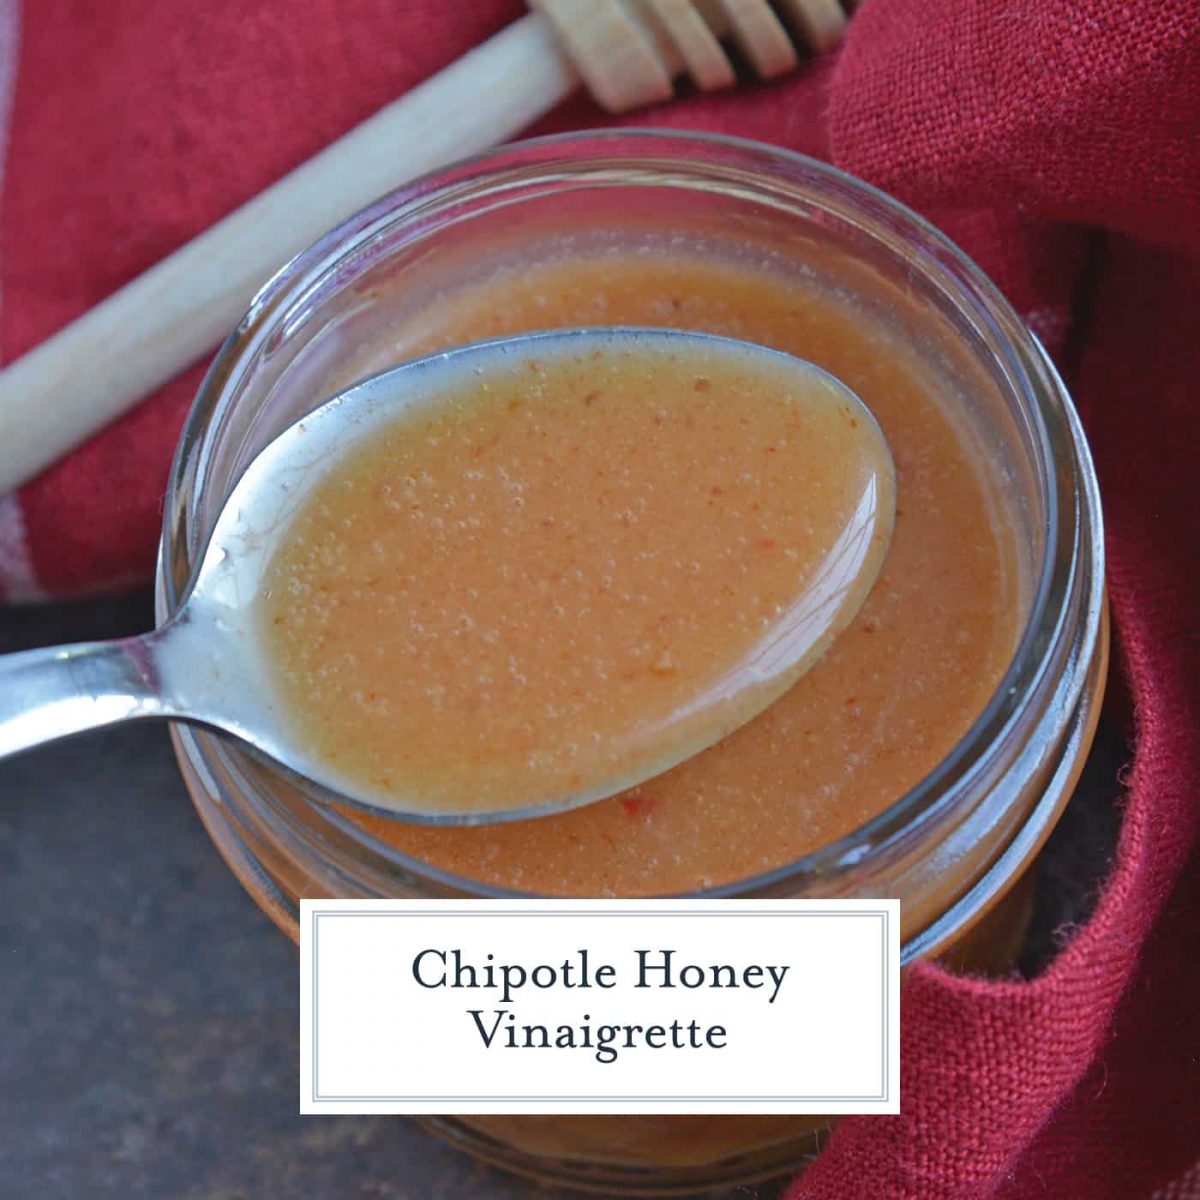 Chipotle Honey Vinaigrette is a sweet and peppery homemade salad dressing blend perfect for serving on fresh green salads, tacos or vegetables. #homemadesaladdressing www.savoryexperiments.com